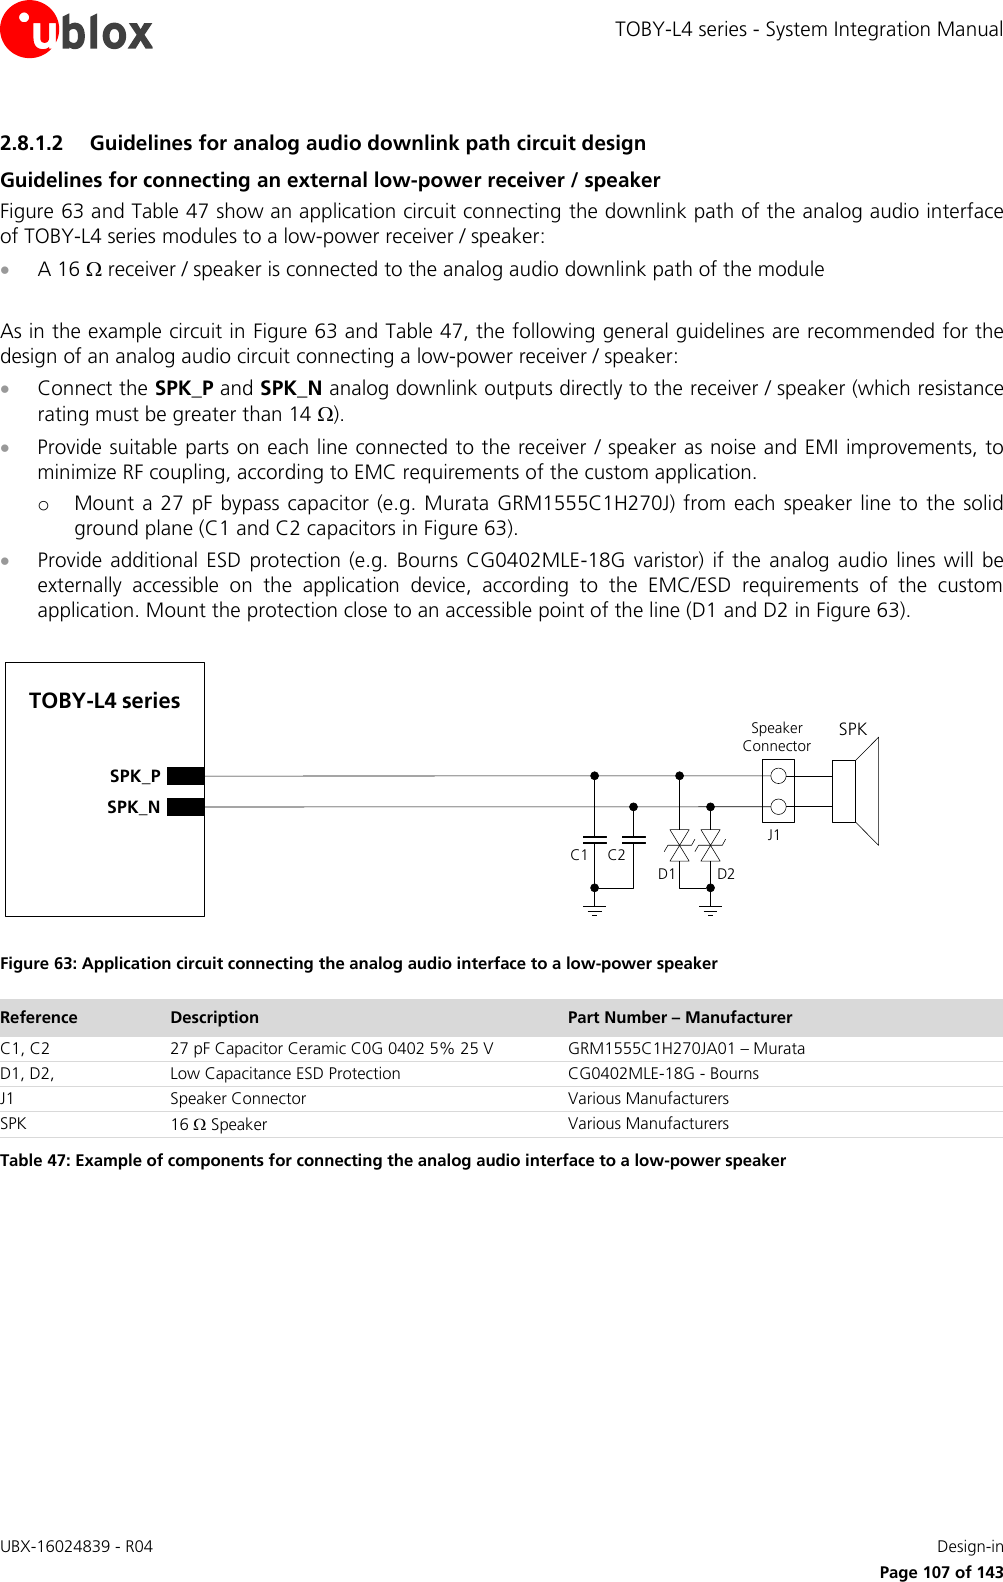 TOBY-L4 series - System Integration Manual UBX-16024839 - R04    Design-in     Page 107 of 143 2.8.1.2 Guidelines for analog audio downlink path circuit design Guidelines for connecting an external low-power receiver / speaker Figure 63 and Table 47 show an application circuit connecting the downlink path of the analog audio interface of TOBY-L4 series modules to a low-power receiver / speaker:  A 16  receiver / speaker is connected to the analog audio downlink path of the module  As in the example circuit in Figure 63 and Table 47, the following general guidelines are recommended for the design of an analog audio circuit connecting a low-power receiver / speaker:  Connect the SPK_P and SPK_N analog downlink outputs directly to the receiver / speaker (which resistance rating must be greater than 14 ).  Provide suitable parts on each line connected to the receiver / speaker as noise and EMI improvements, to minimize RF coupling, according to EMC requirements of the custom application. o Mount a 27 pF bypass  capacitor  (e.g. Murata GRM1555C1H270J) from each  speaker  line to  the solid ground plane (C1 and C2 capacitors in Figure 63).  Provide  additional  ESD  protection  (e.g.  Bourns CG0402MLE-18G  varistor)  if  the analog audio  lines will  be externally  accessible  on  the  application  device,  according  to  the  EMC/ESD  requirements  of  the  custom application. Mount the protection close to an accessible point of the line (D1 and D2 in Figure 63).  TOBY-L4 seriesSPK_PSPK_ND1C1 C2SPKSpeaker ConnectorJ1D2 Figure 63: Application circuit connecting the analog audio interface to a low-power speaker  Reference Description Part Number – Manufacturer C1, C2 27 pF Capacitor Ceramic C0G 0402 5% 25 V  GRM1555C1H270JA01 – Murata D1, D2,  Low Capacitance ESD Protection CG0402MLE-18G - Bourns J1 Speaker Connector Various Manufacturers  SPK 16  Speaker  Various Manufacturers Table 47: Example of components for connecting the analog audio interface to a low-power speaker   